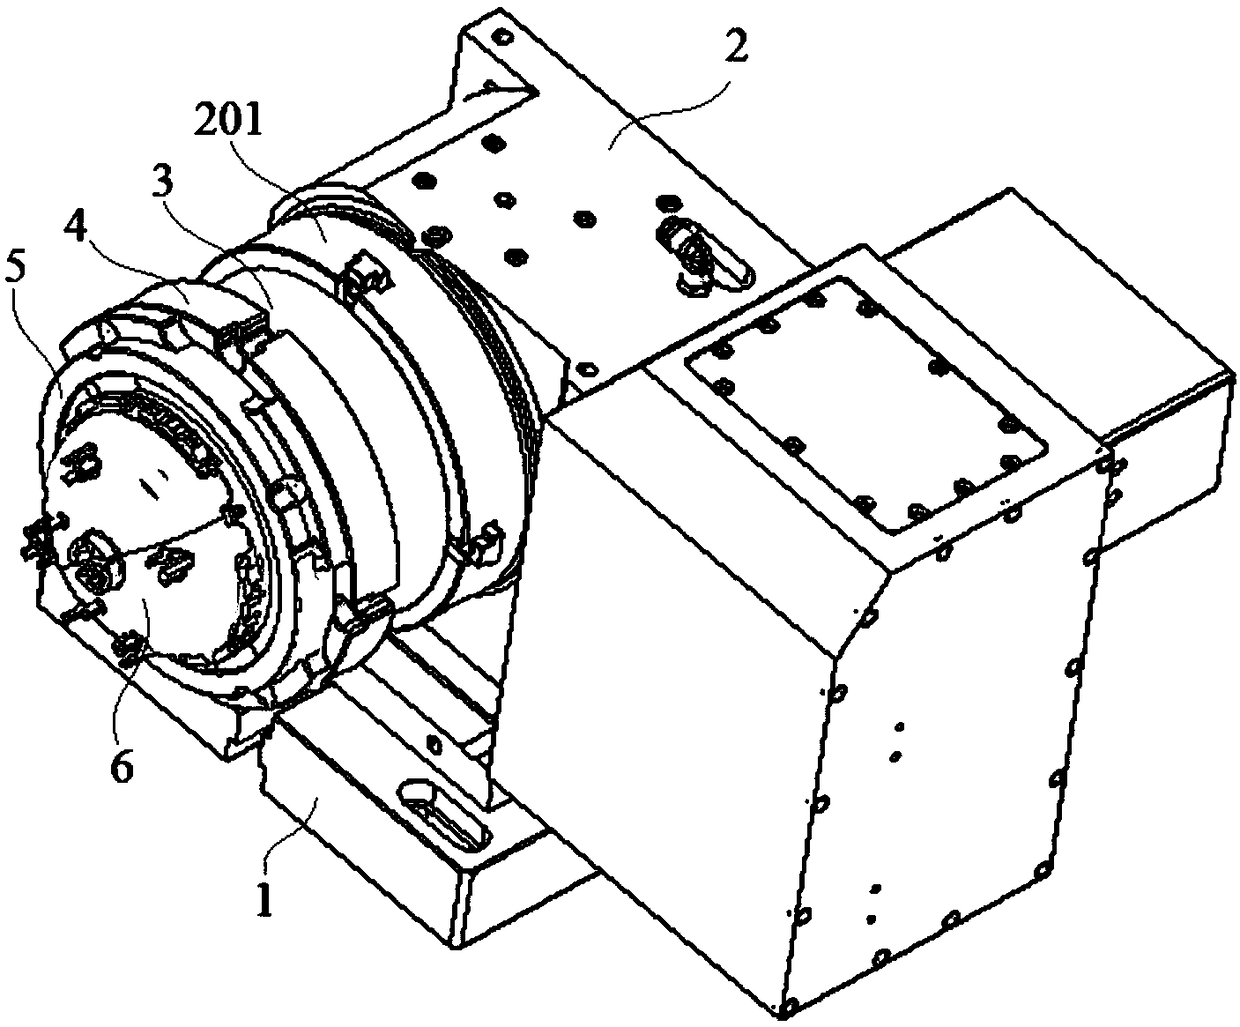 Four-axle rotary machining fixture